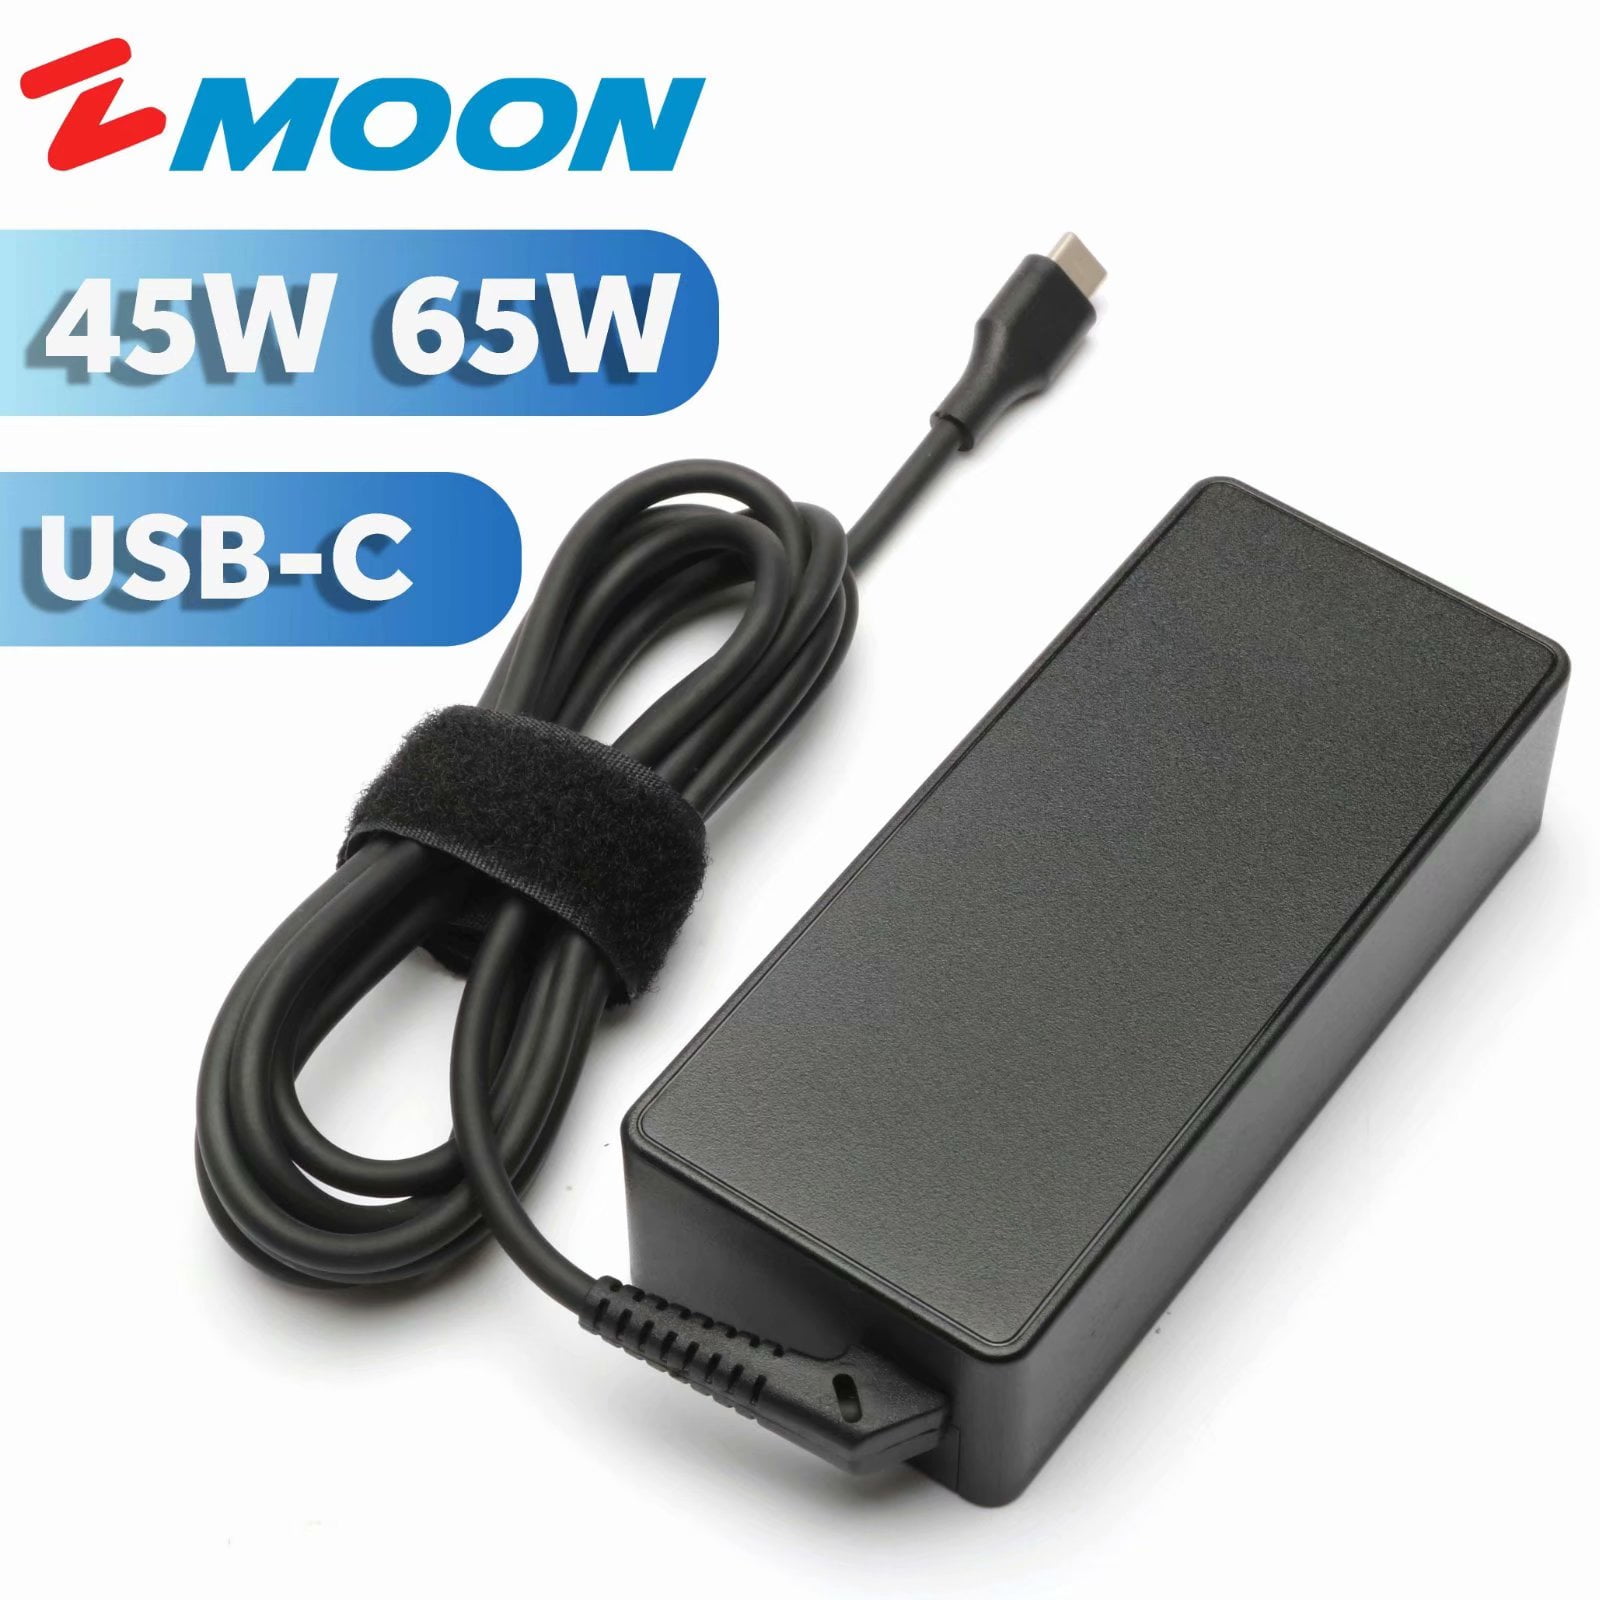 65W 45W USB-C AC Charger Fit for Lenovo ThinkPad T480 T480s T580 